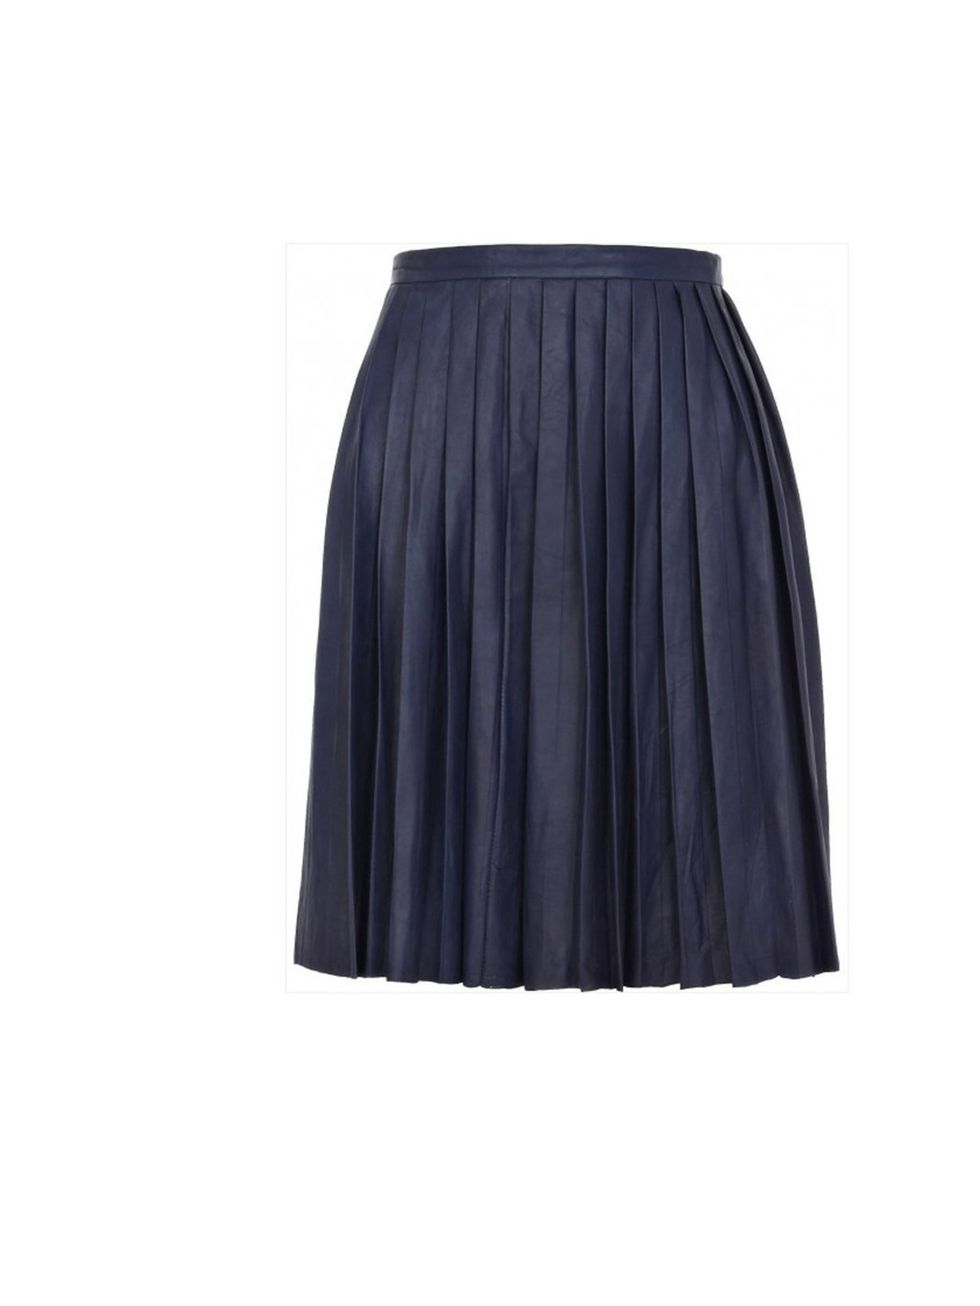 <p>Eudon Choi for River Island leather pleated skirt, £150</p>